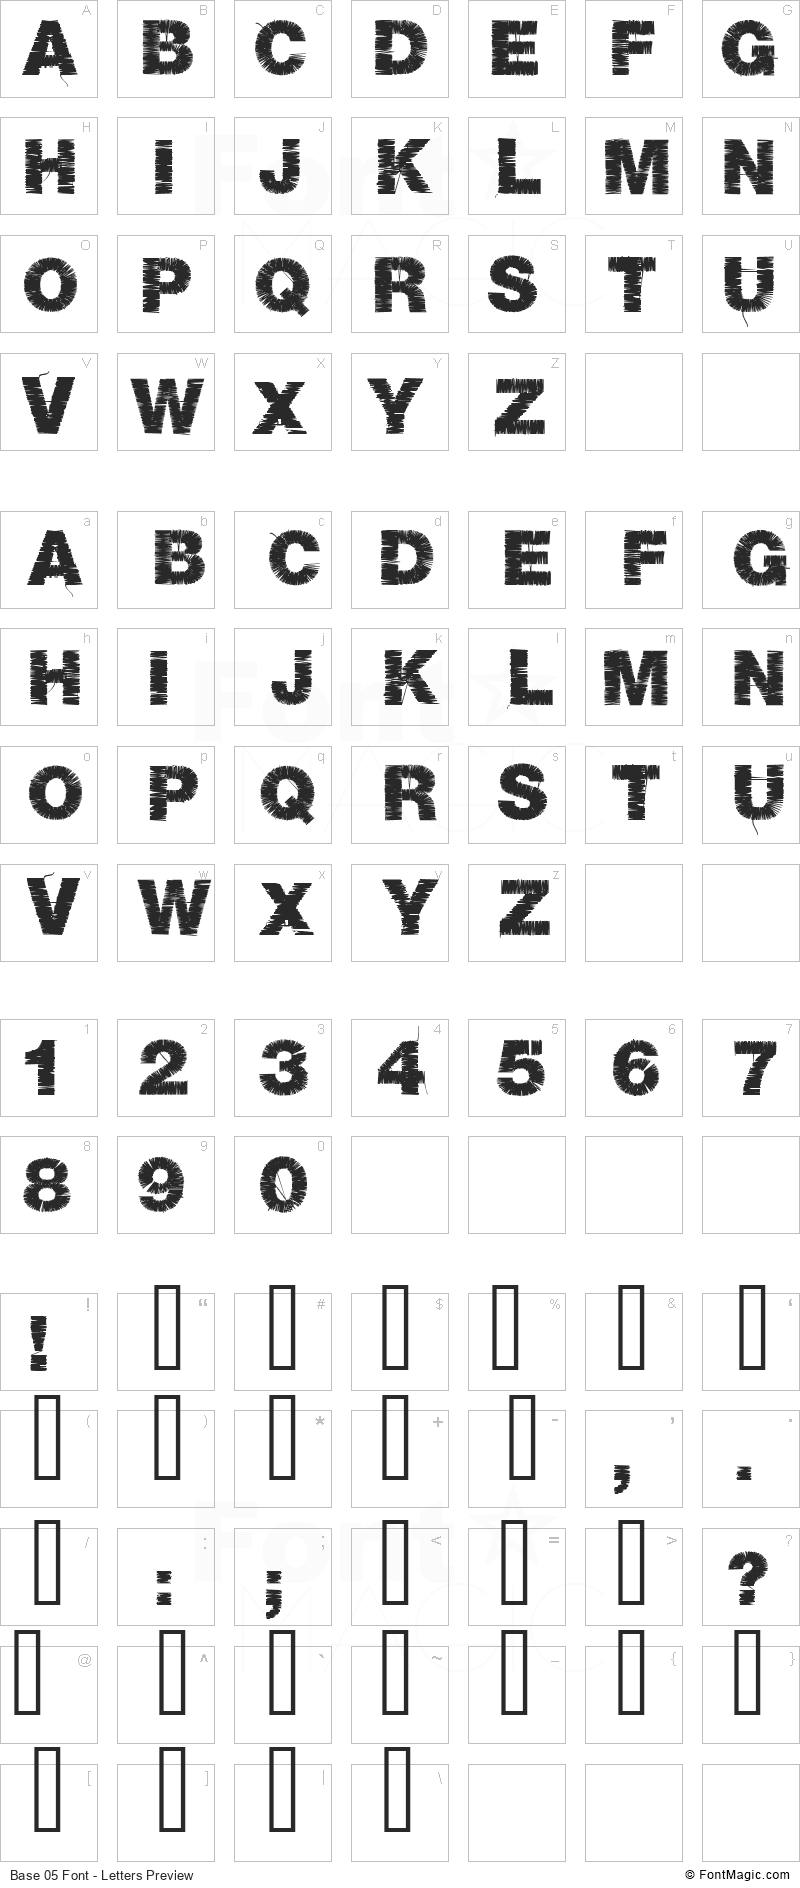 Base 05 Font - All Latters Preview Chart